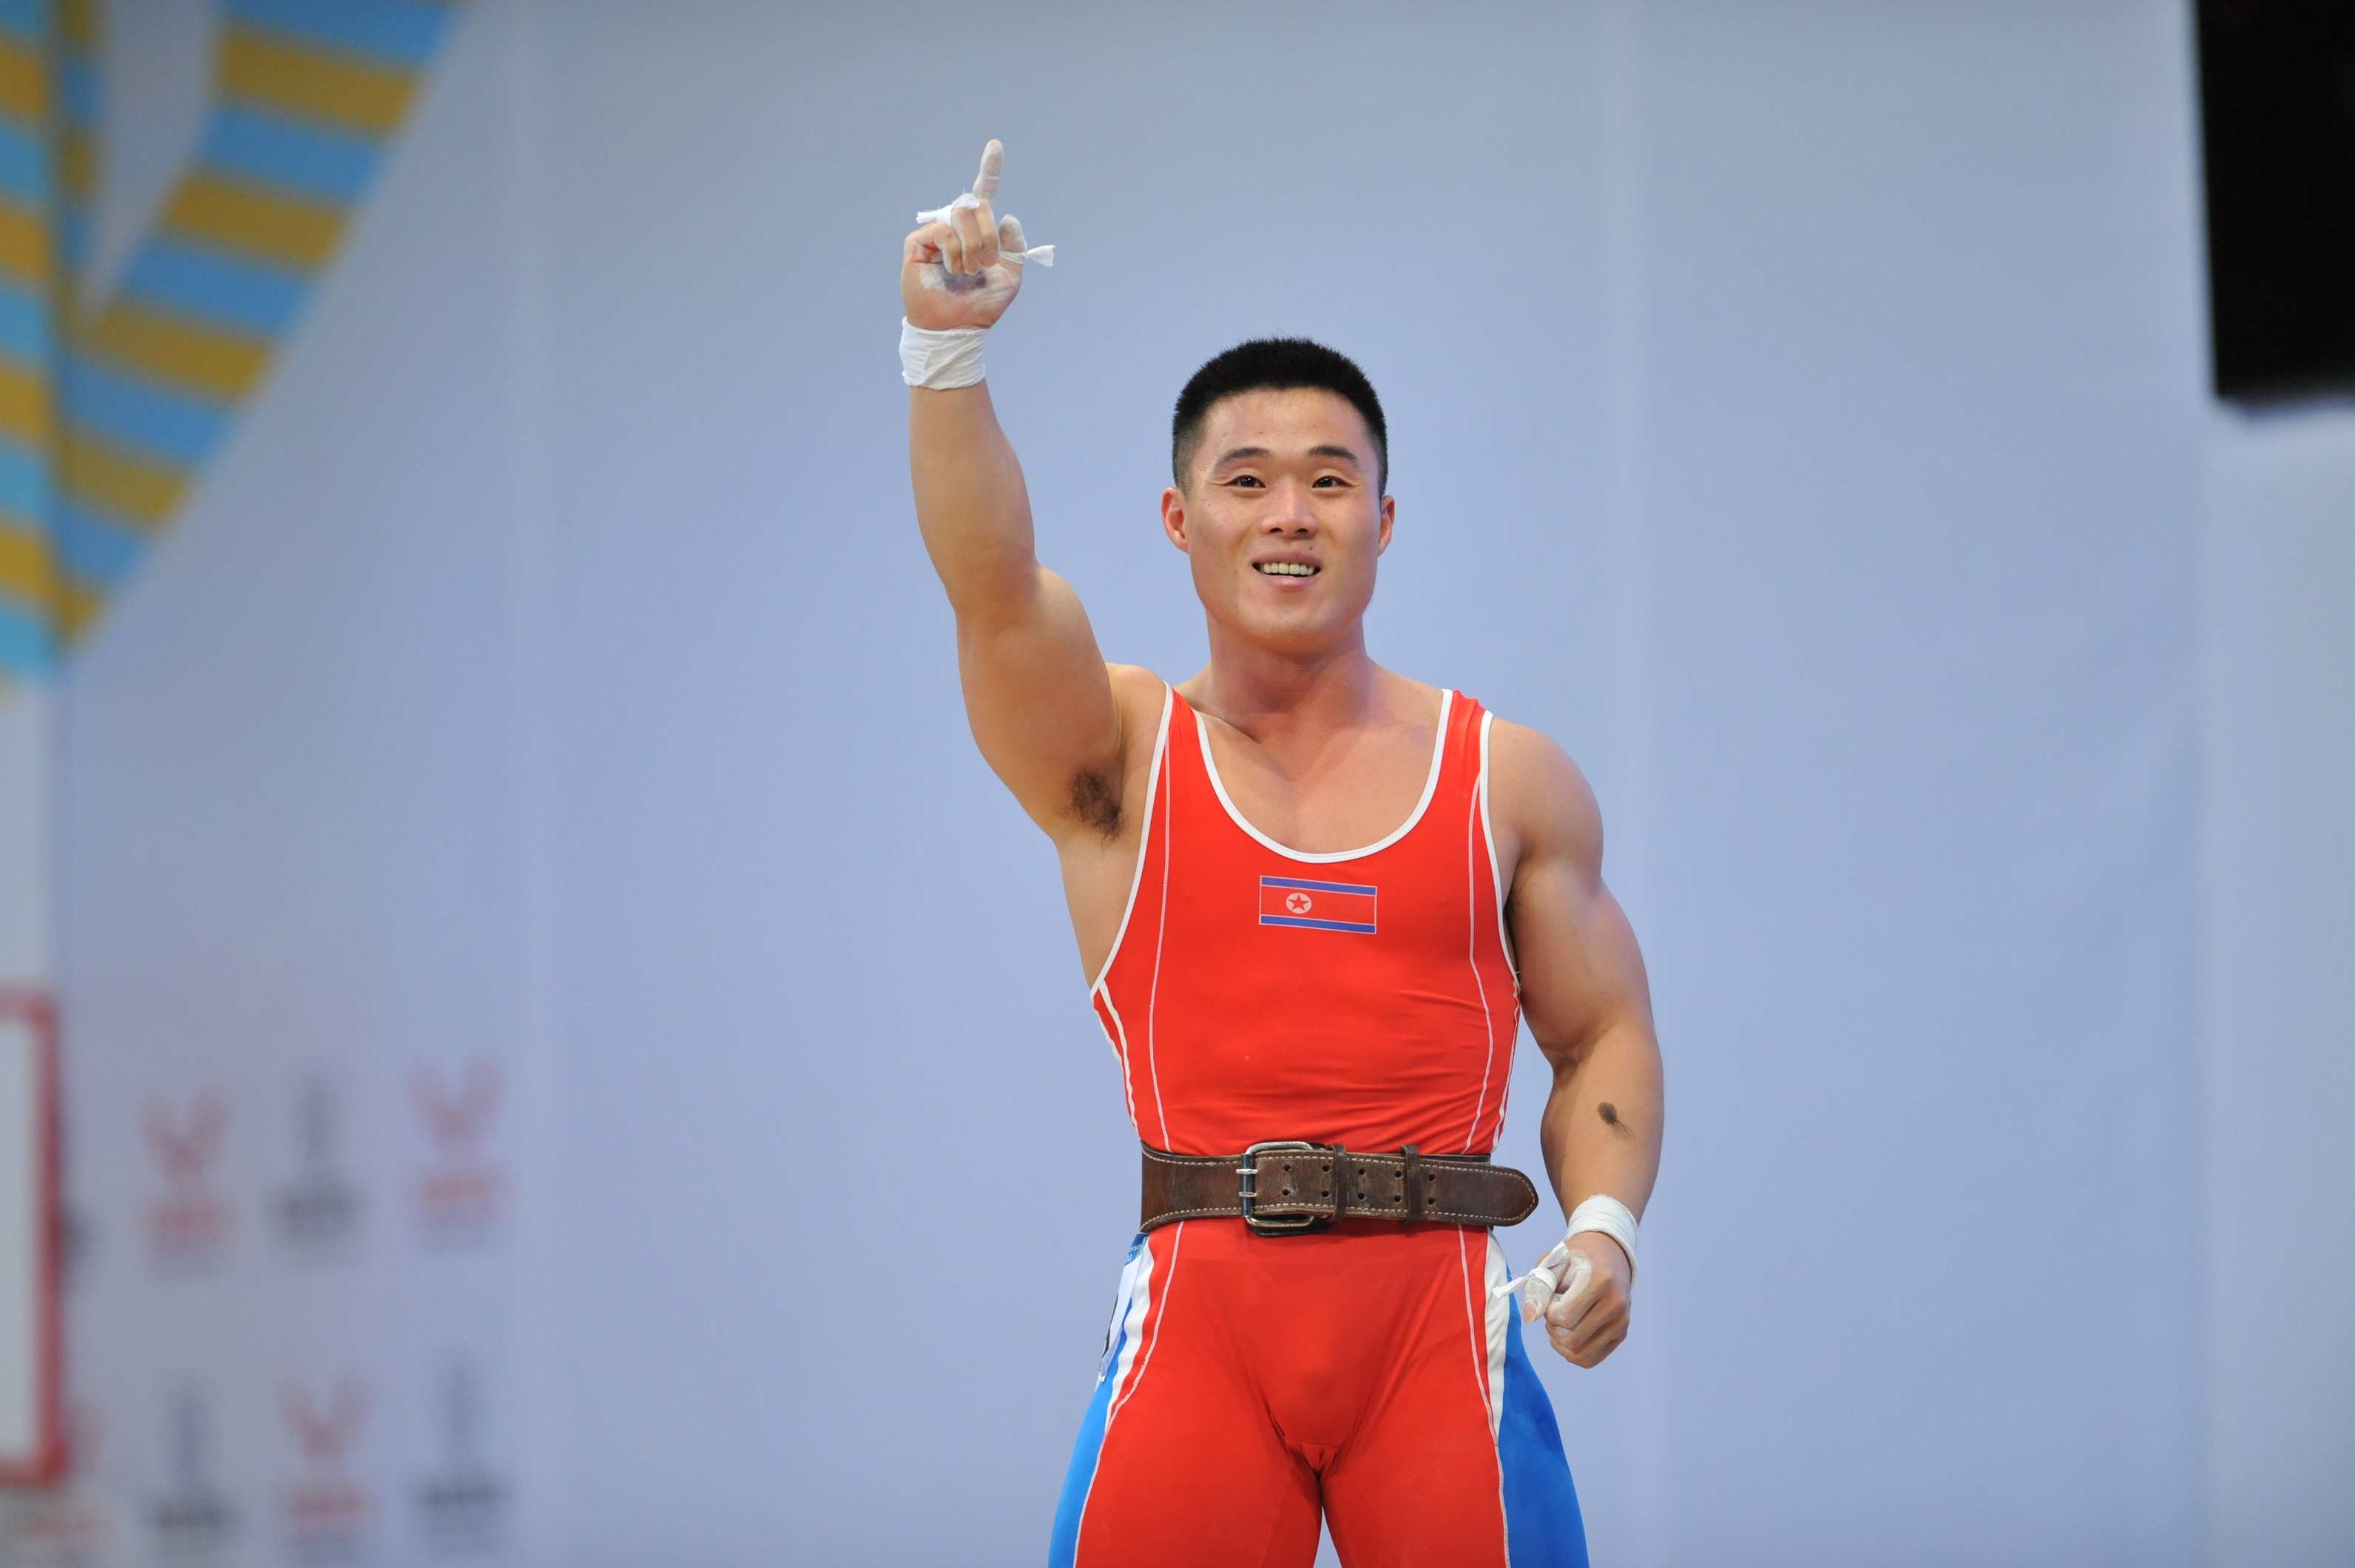 North Korea put China in their place again on the second day of the International Weightlifting Federation World Championships in Almaty ©Almaty 2014